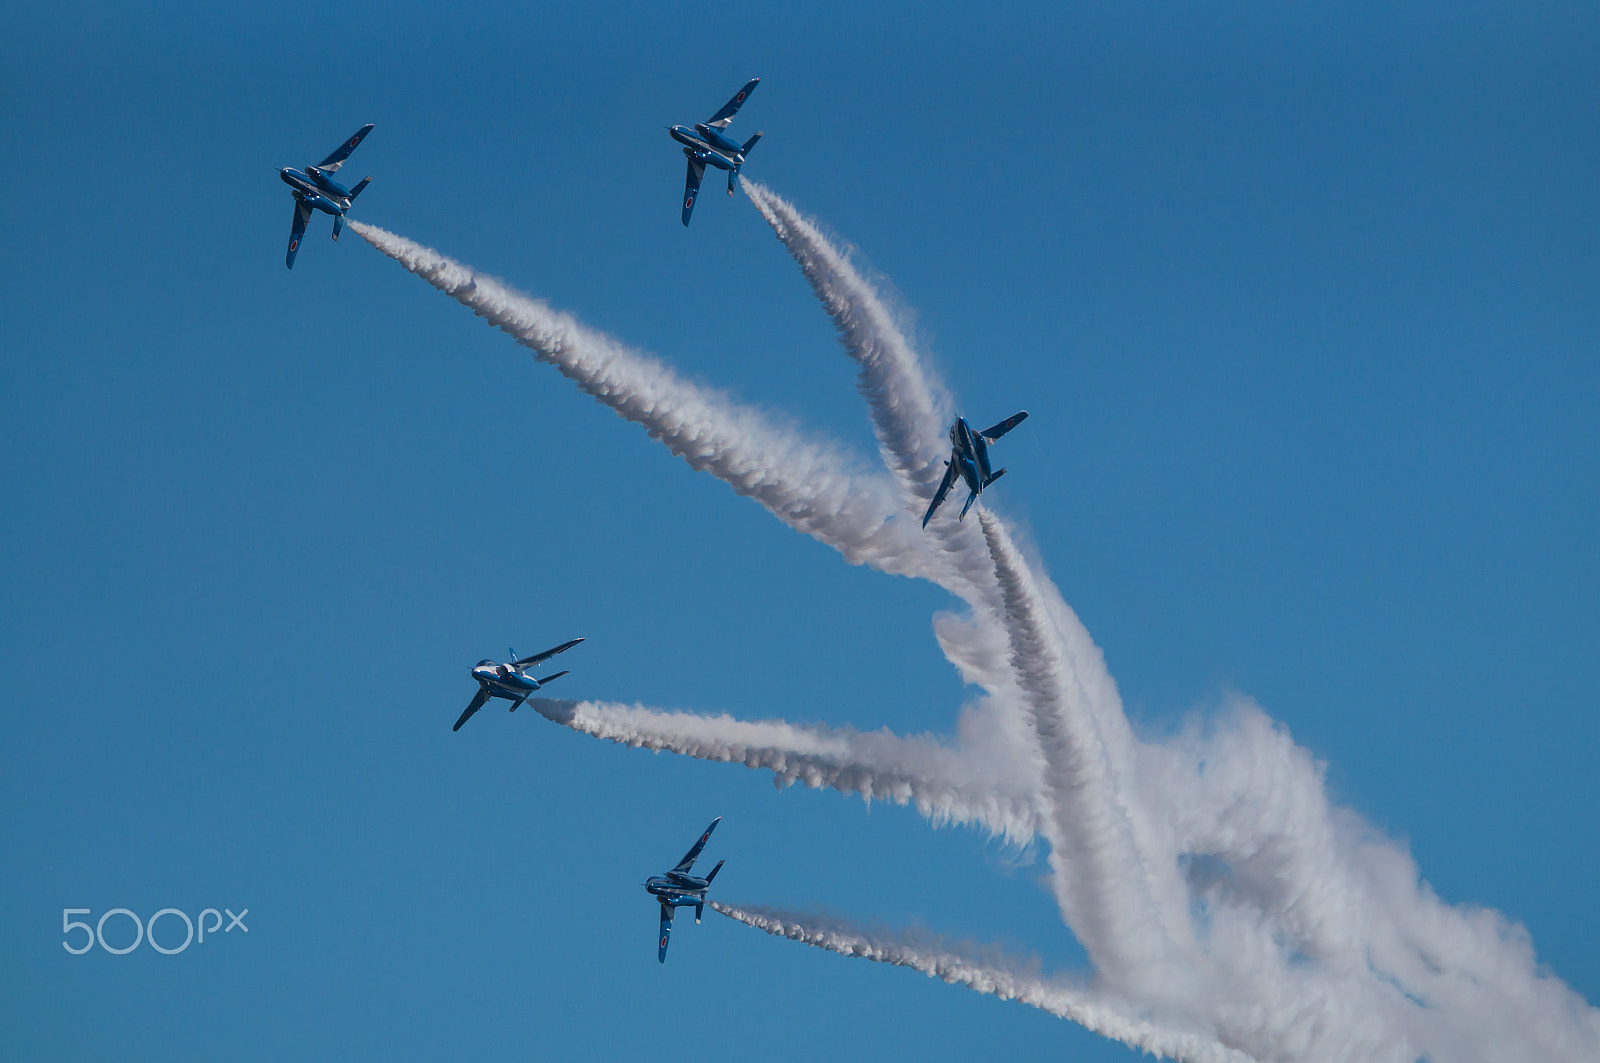 Sony SLT-A57 + Tamron SP 150-600mm F5-6.3 Di VC USD sample photo. Demonstration flights of blue impulse photography